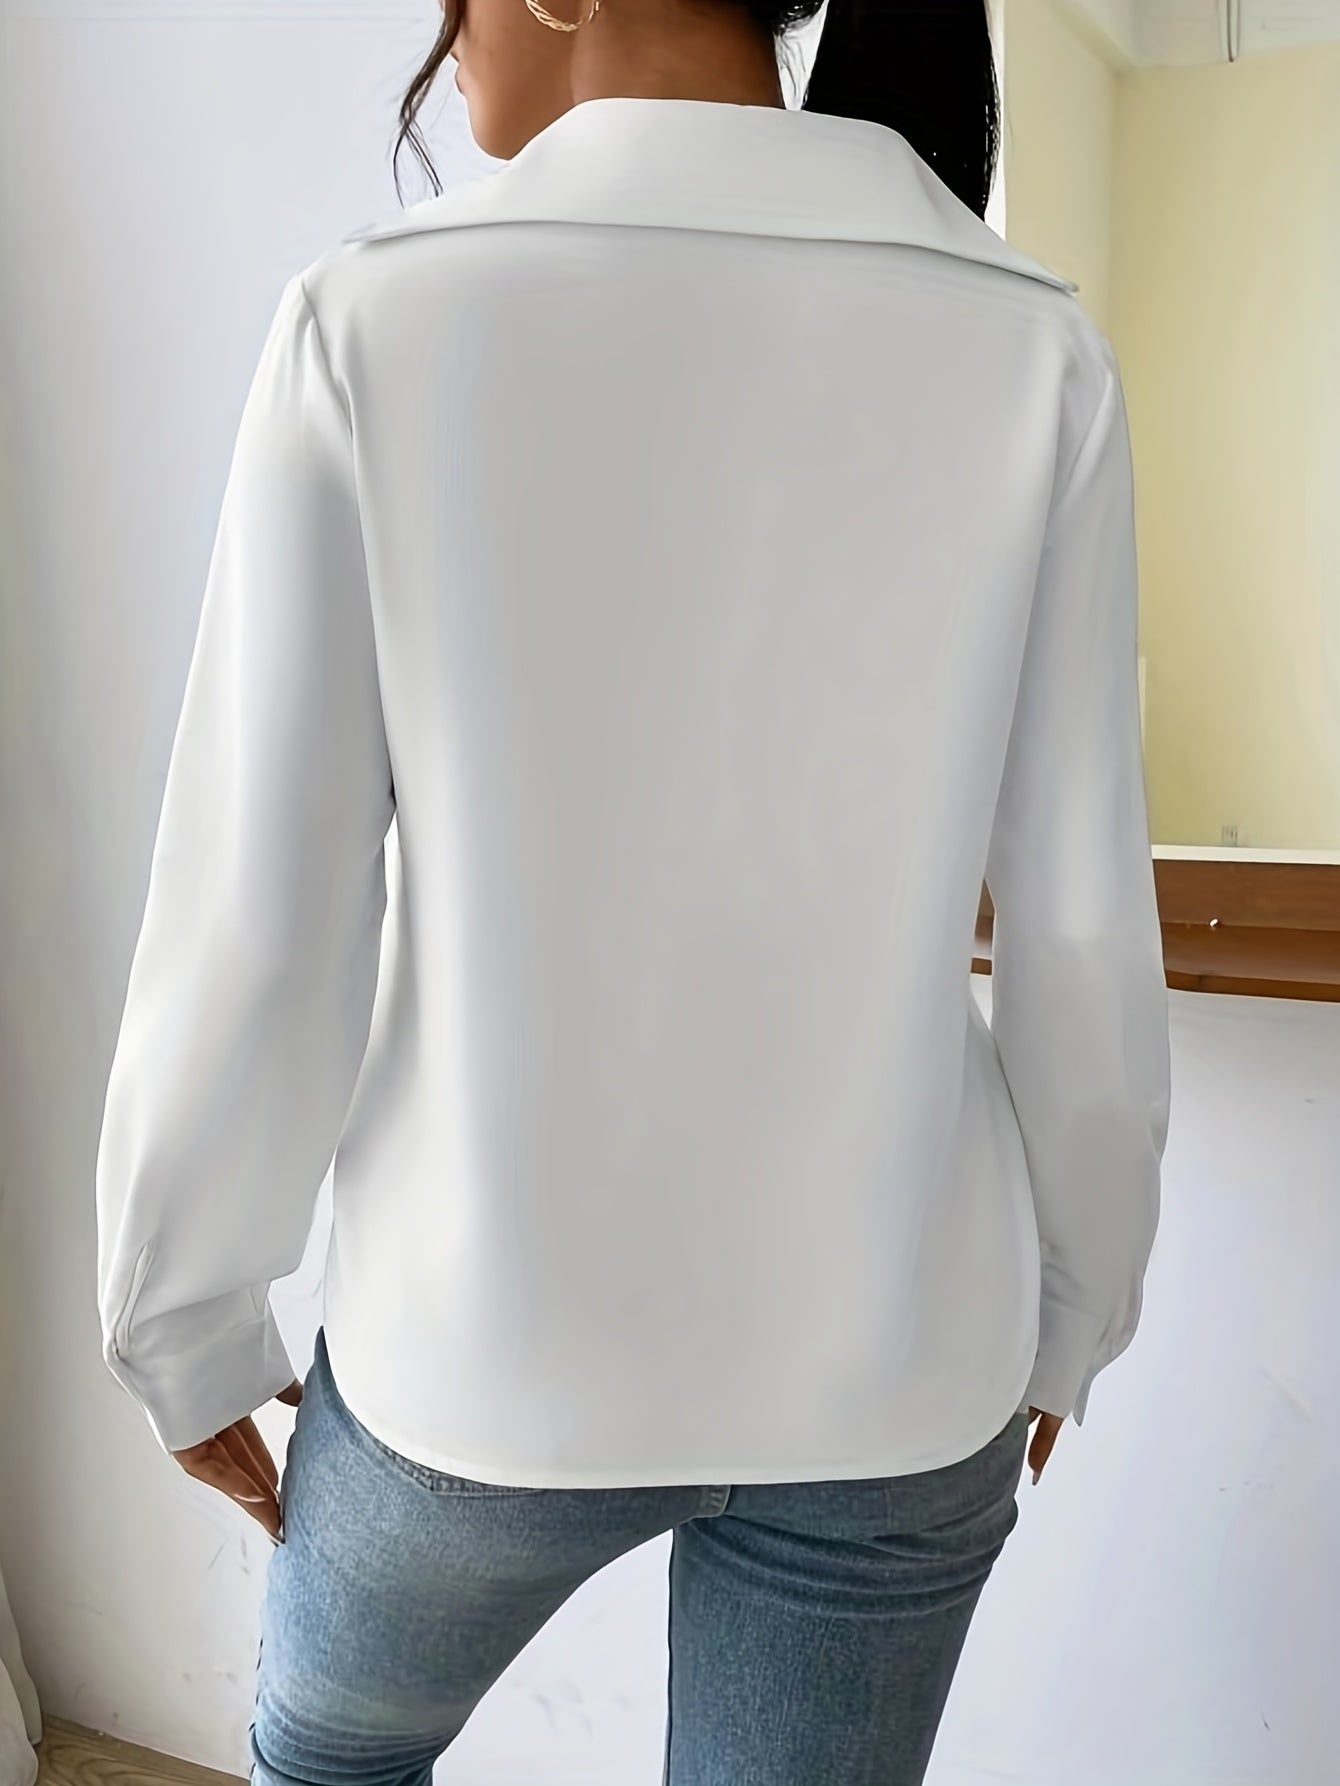 Antmvs Simple Solid Blouse, Casual V Neck Long Sleeve Versatile Blouse, Women's Clothing